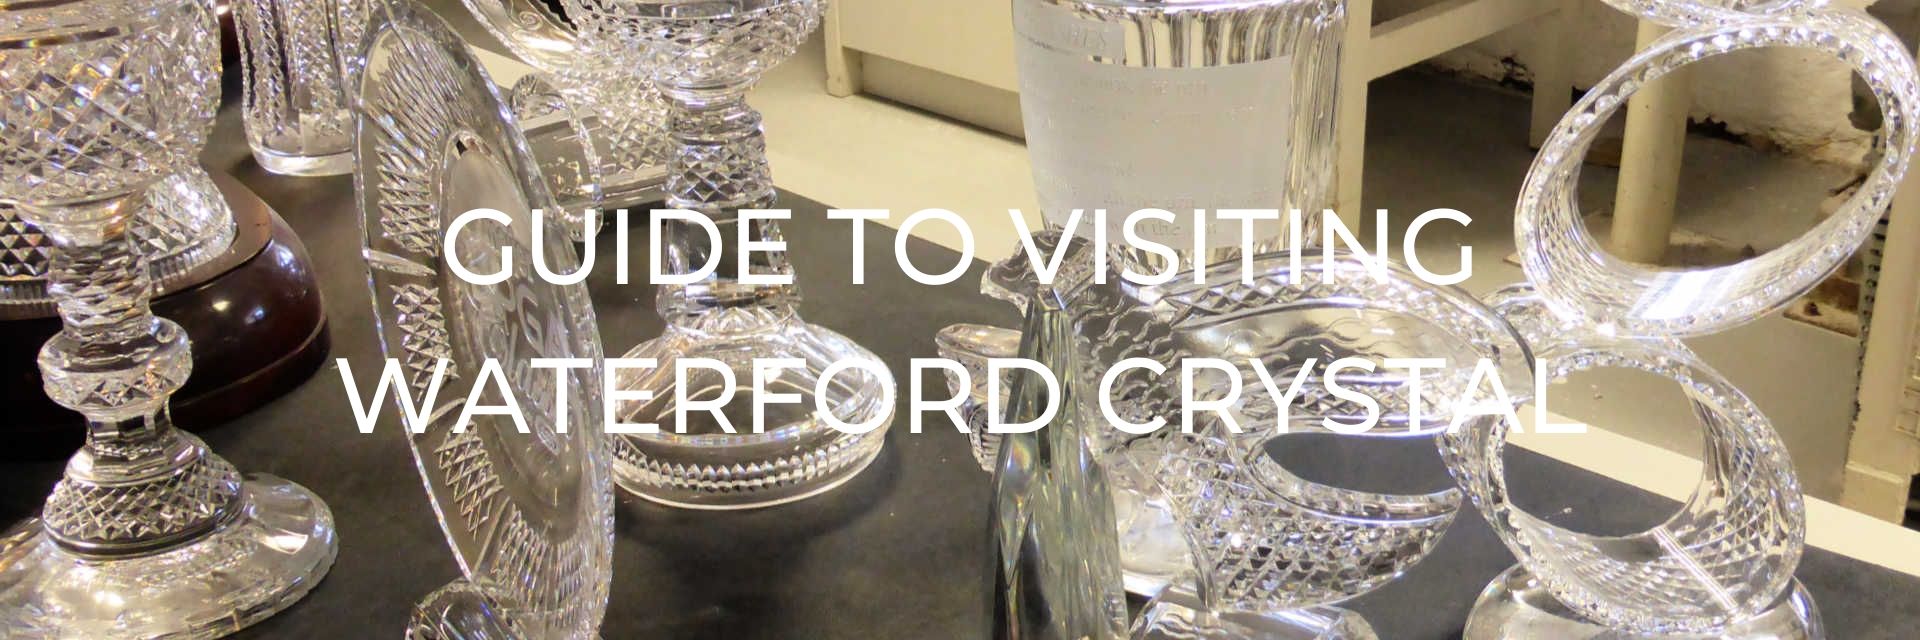 waterford crystal ireland tour